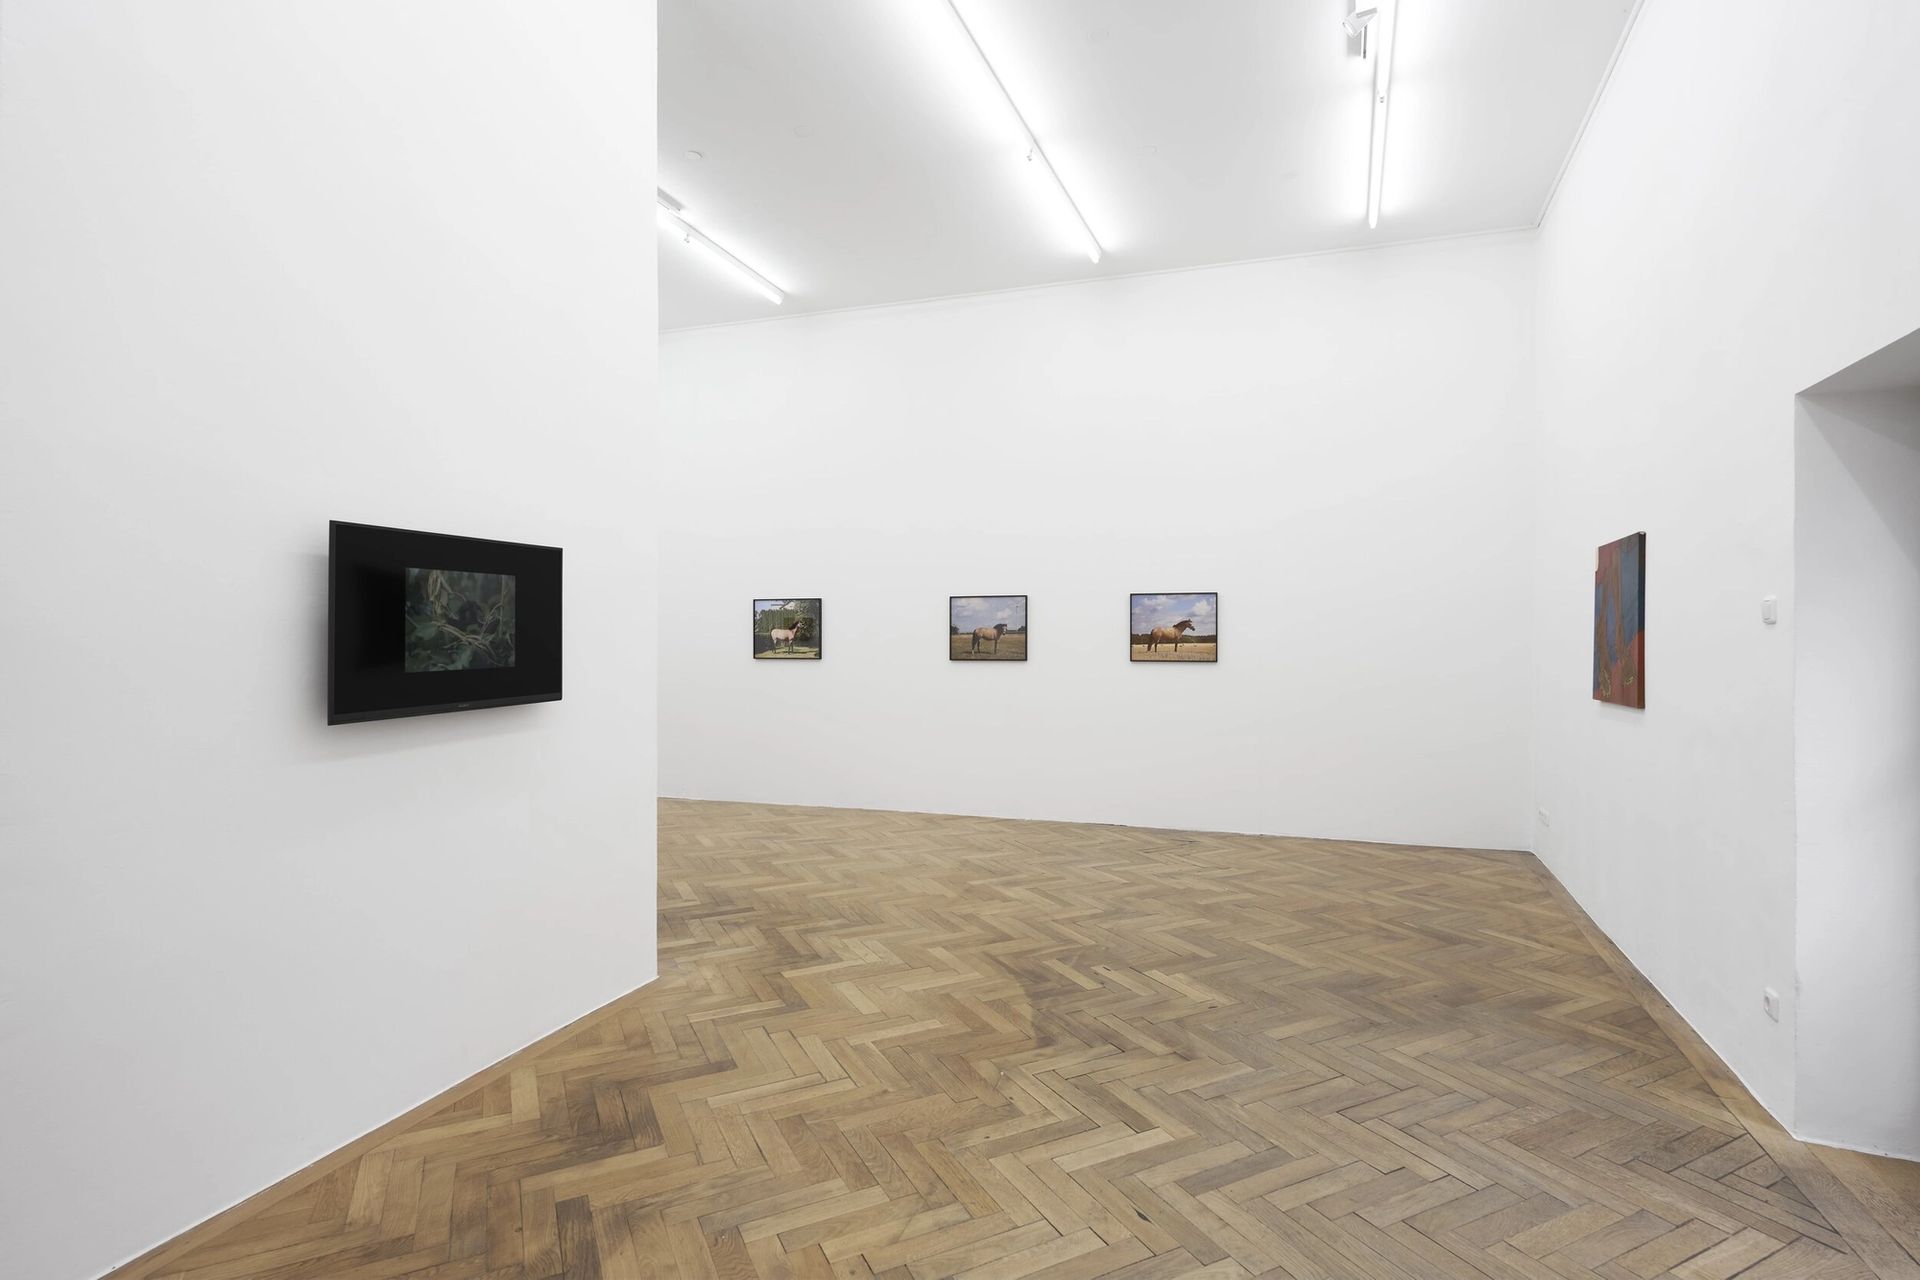 Installation view: „Various Others 2020“, Lena Henke, Dominique Knowels, Megan Francis Sullivan in cooperation with Galerie Emanuel Layr, photo: Ulrich Gebert